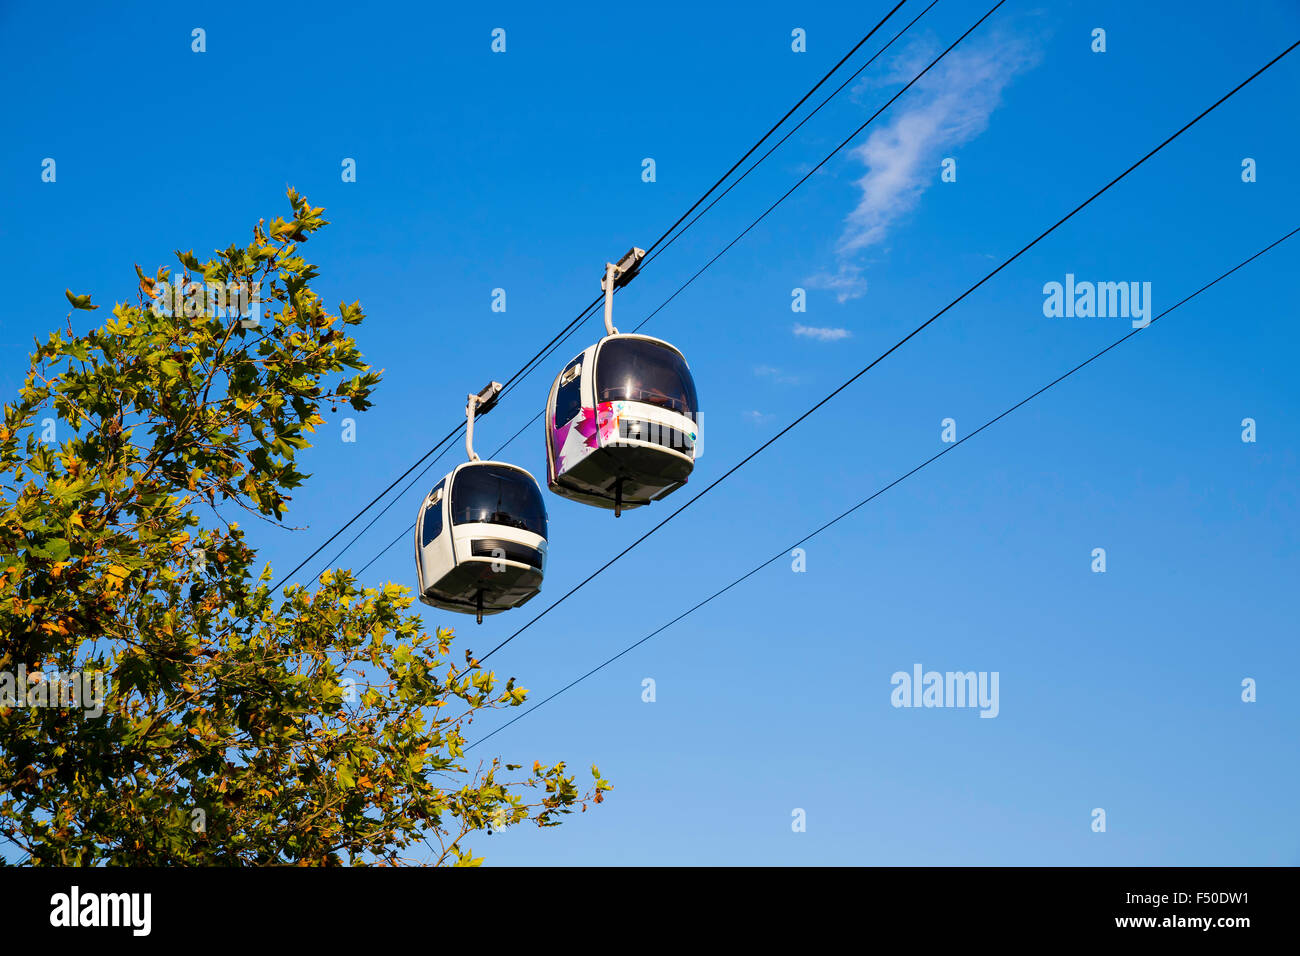 Two cable cars in motion in the air with  blue sky background Stock Photo